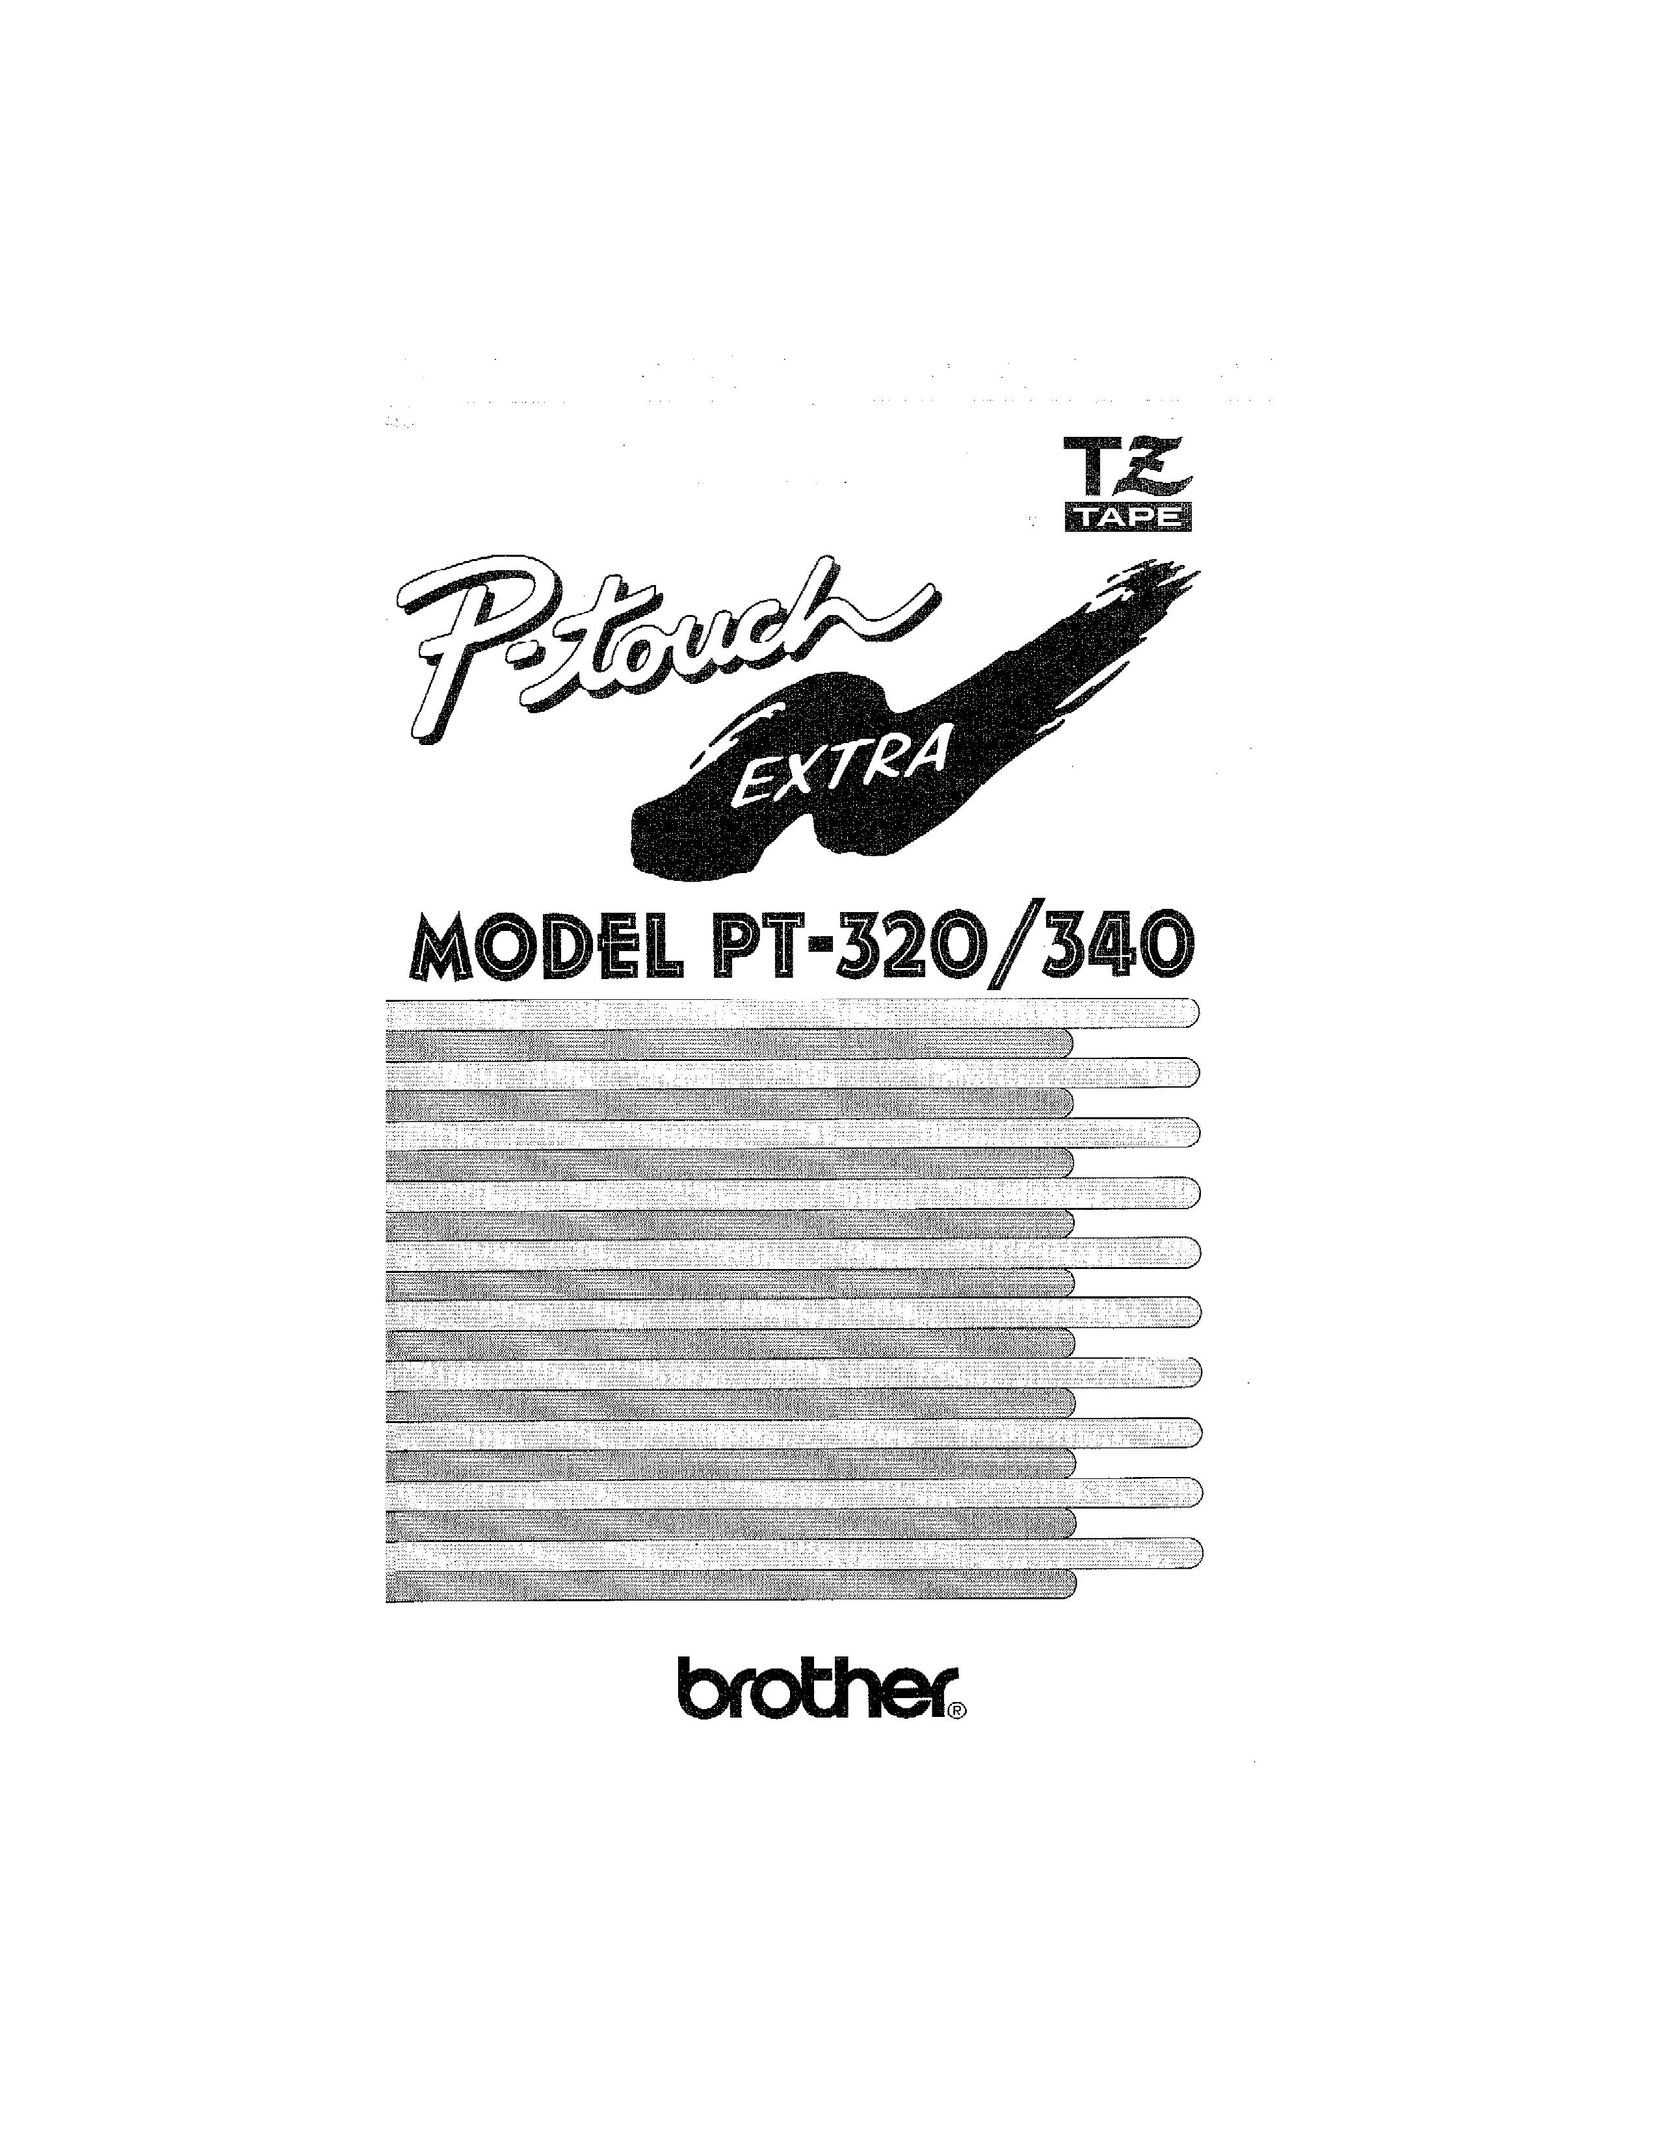 Brother PT-320 Video Gaming Accessories User Manual